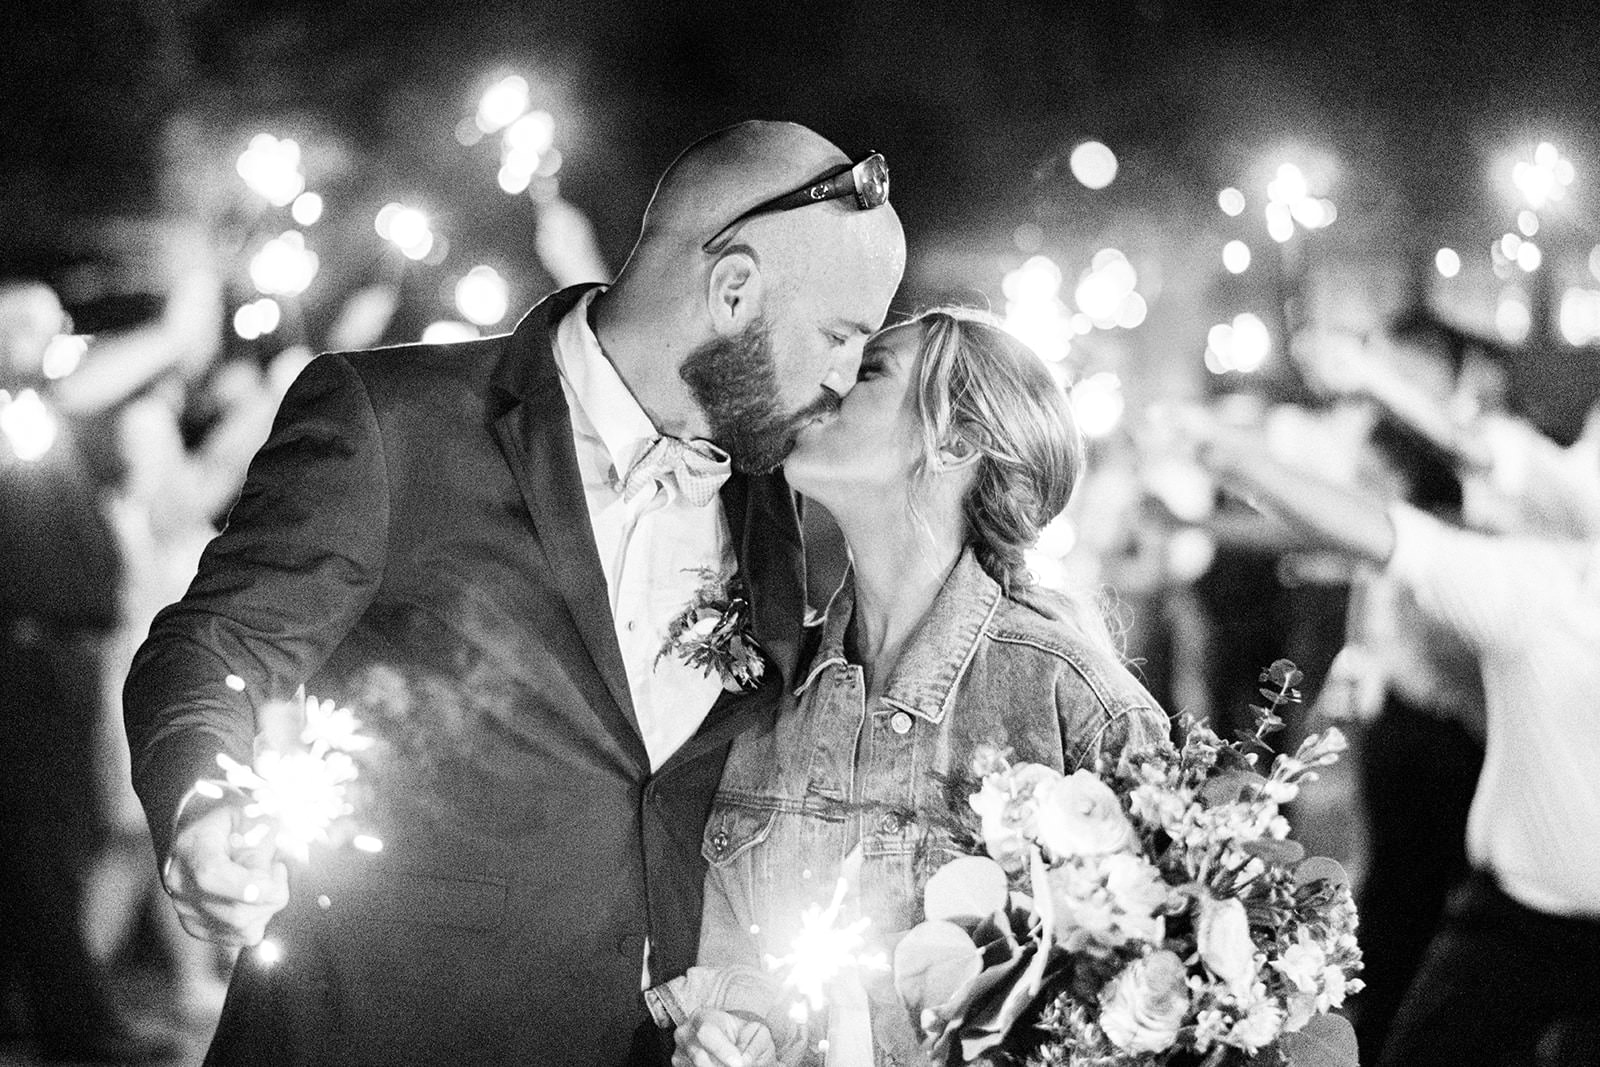 Sparkler exit with Bride and Groom at the Farm at Eagles Ridge wedding in Lancaster, PA